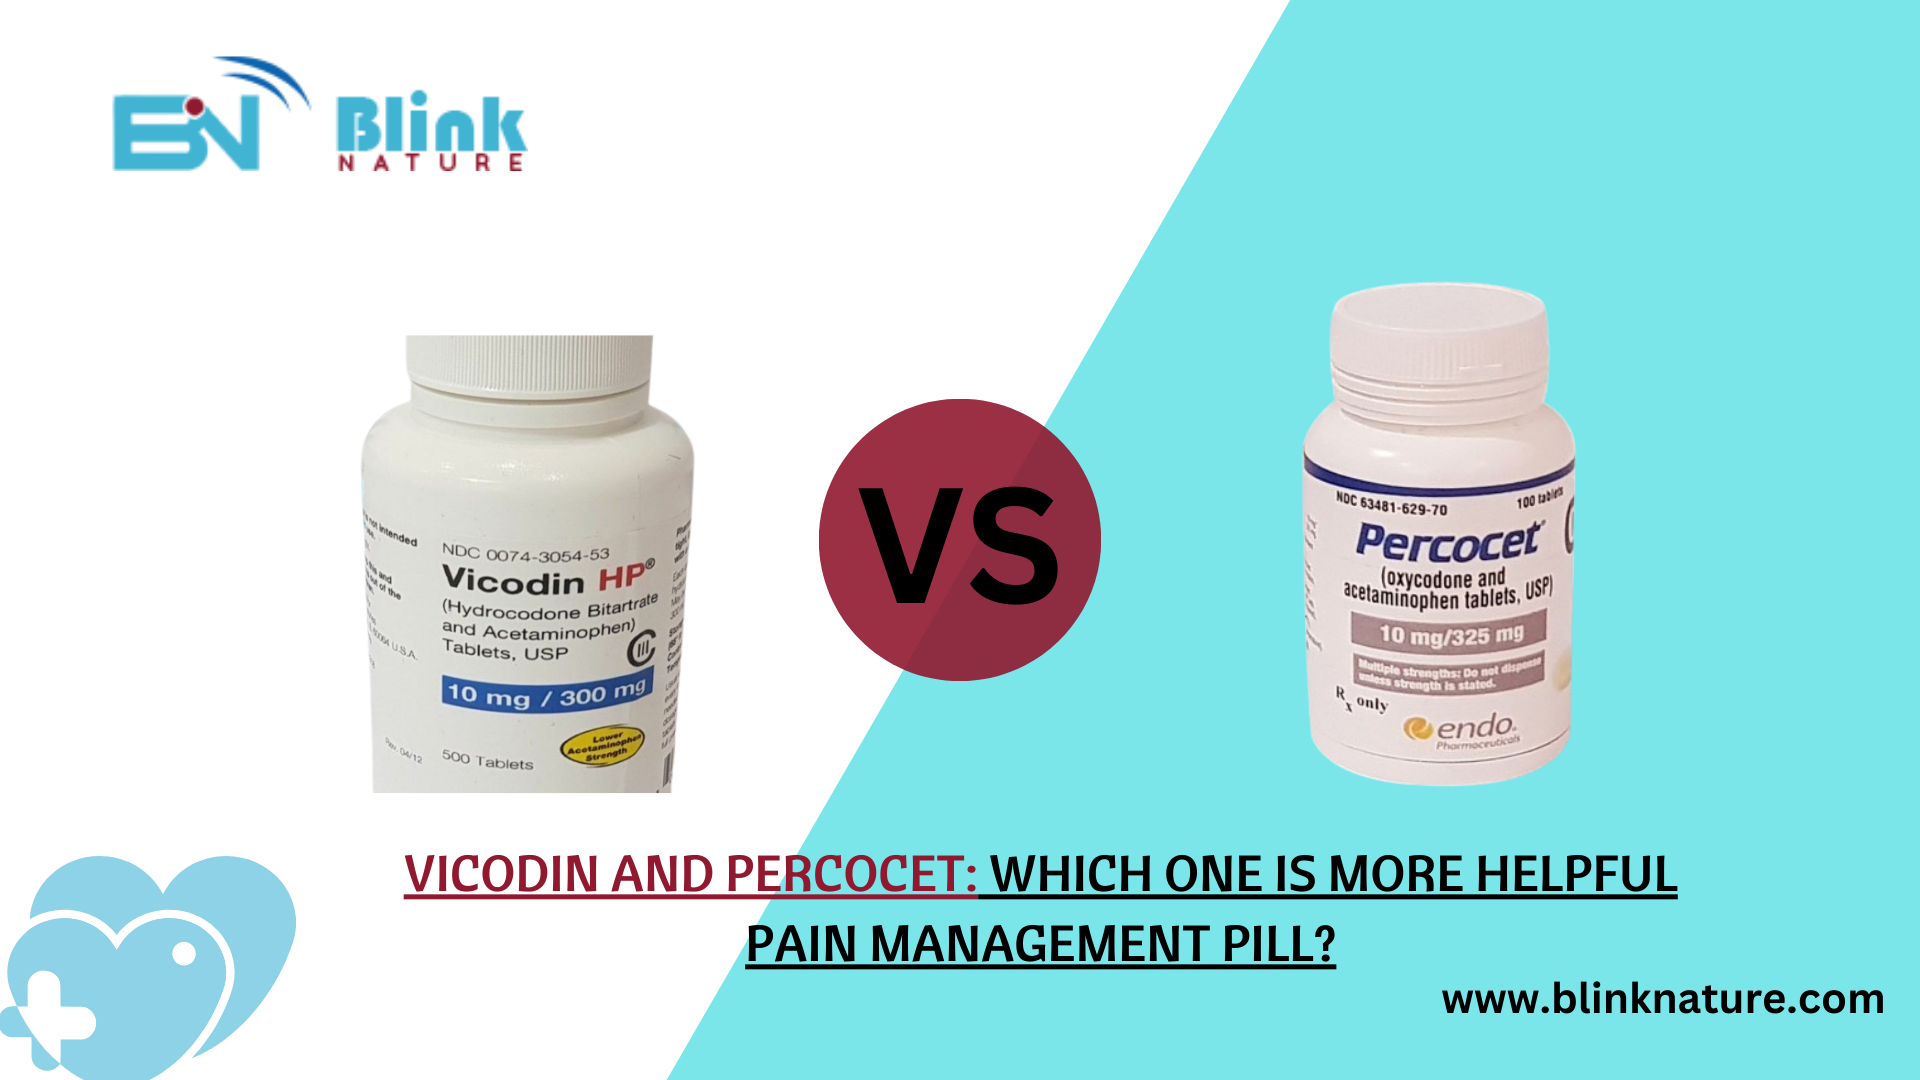 Vicodin and Percocet: Which is more Helpful pain management Pill?